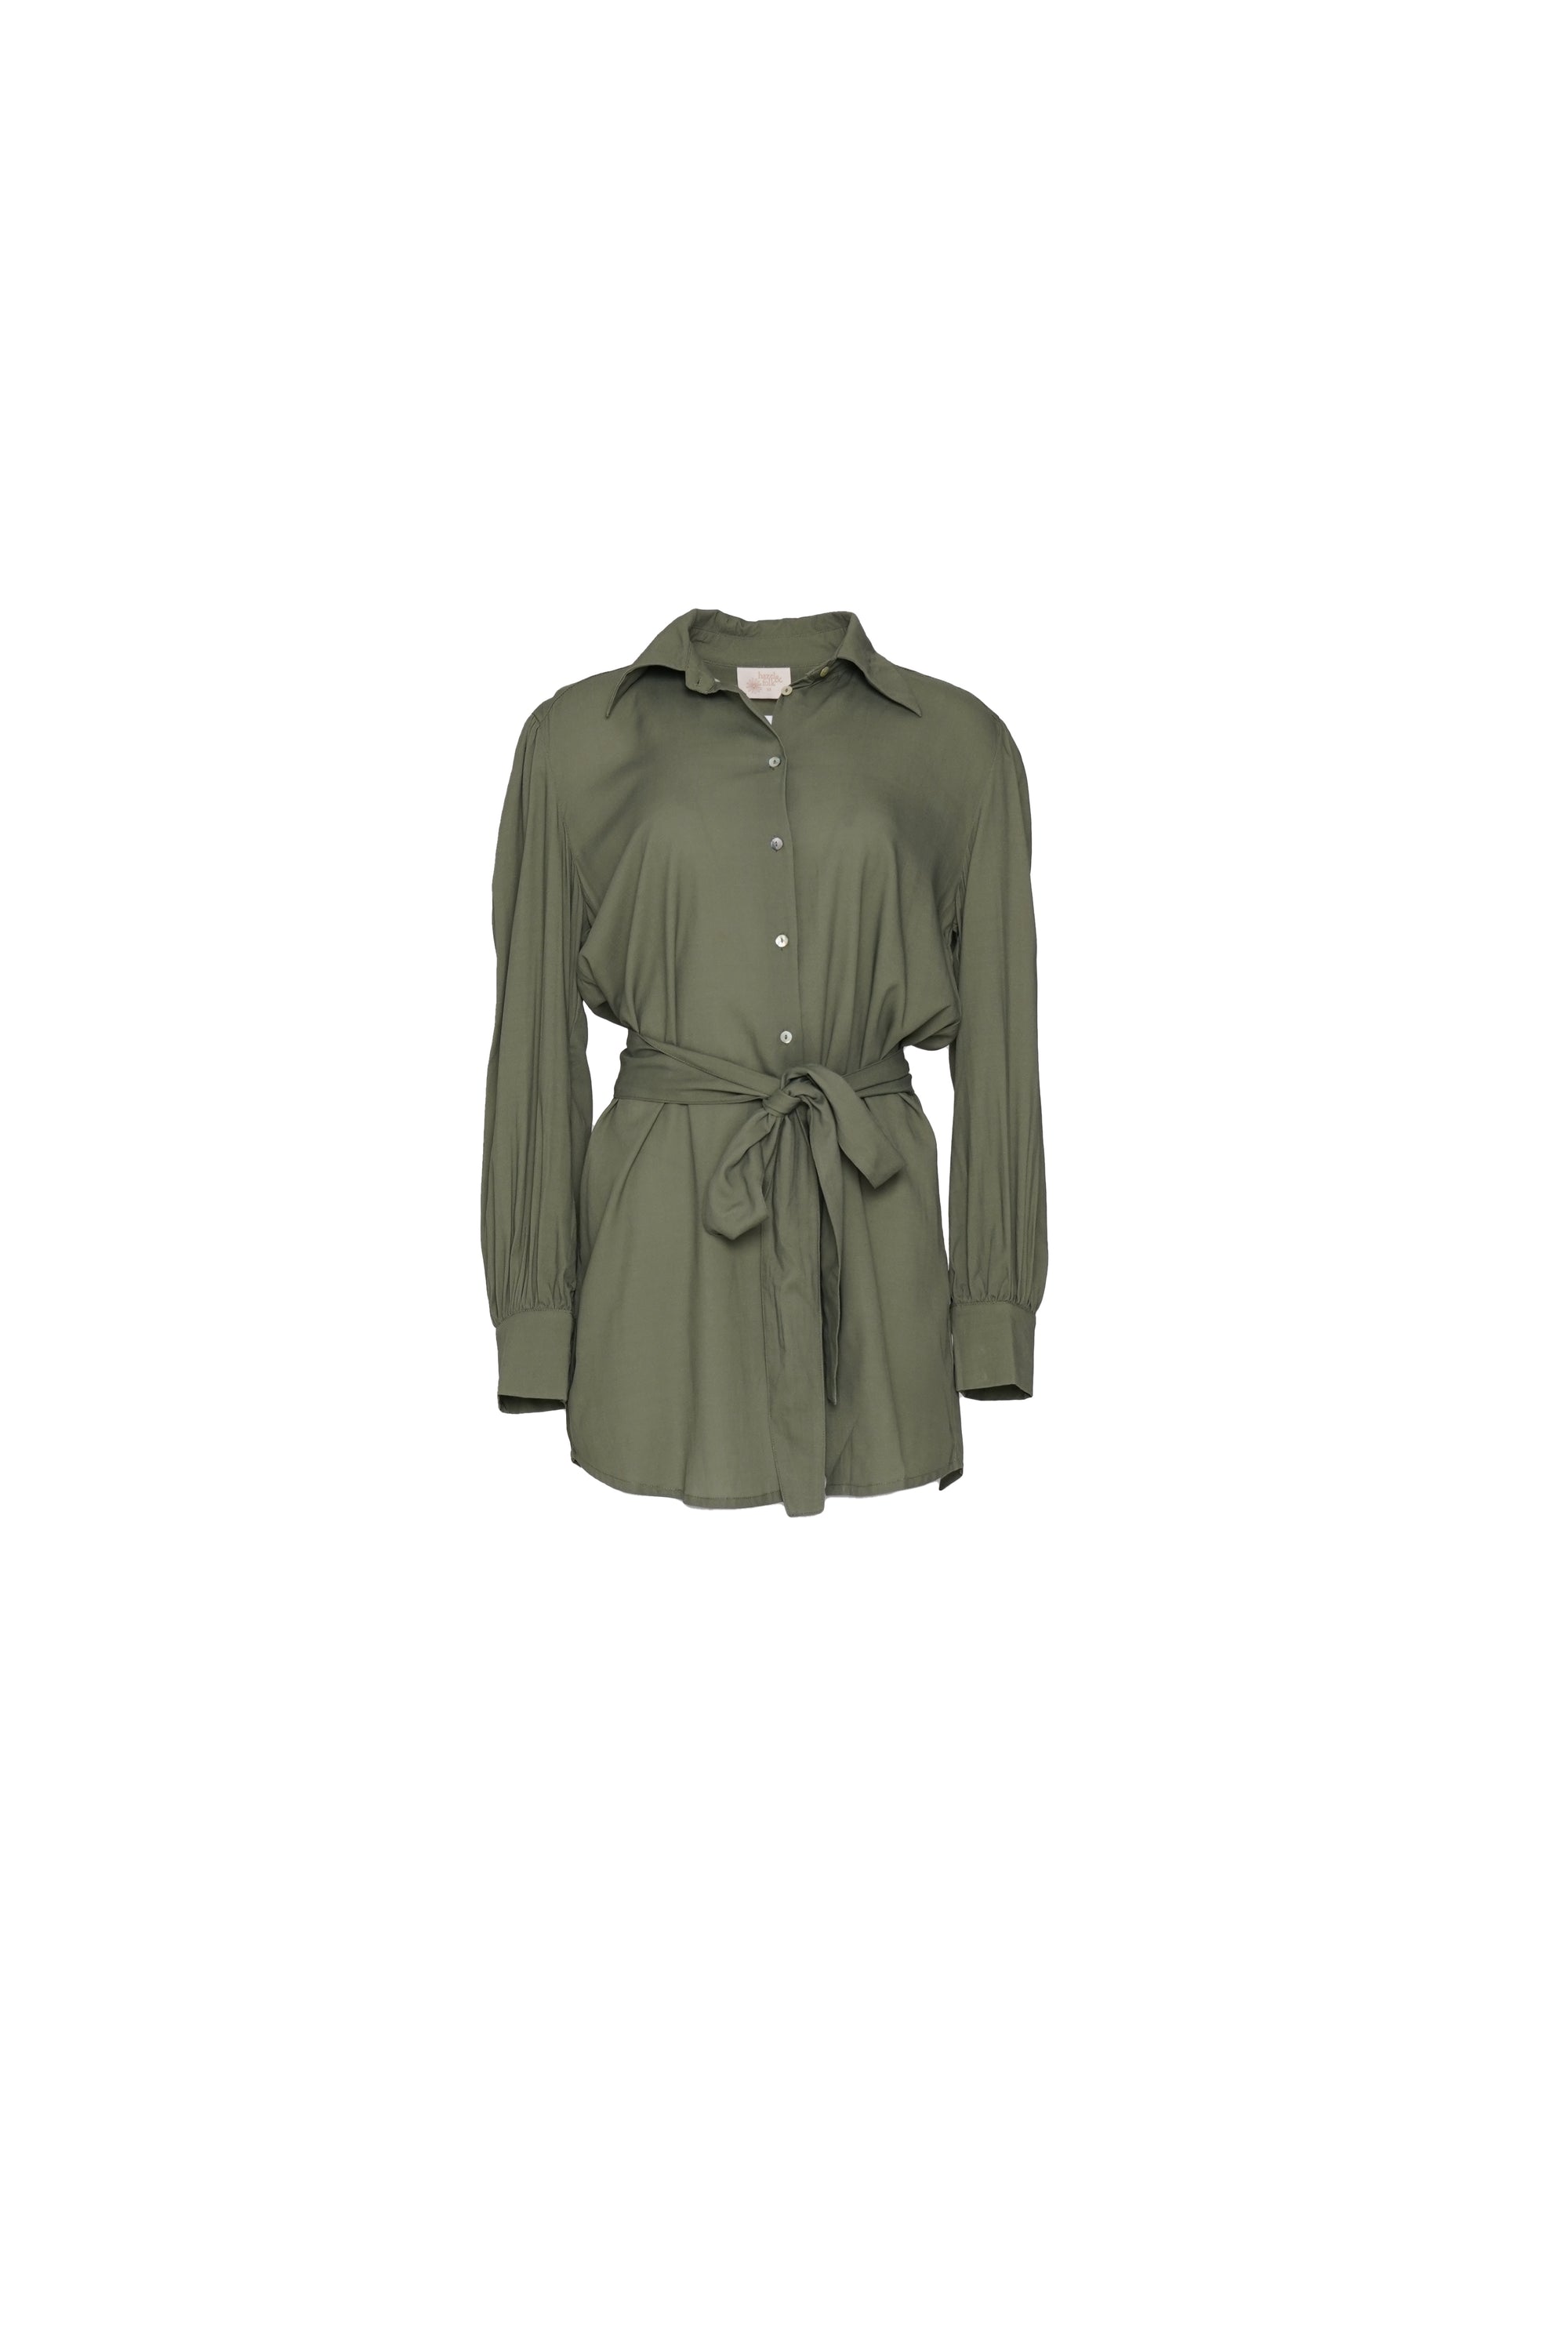 Front view of silky-feel olive green shirt dress